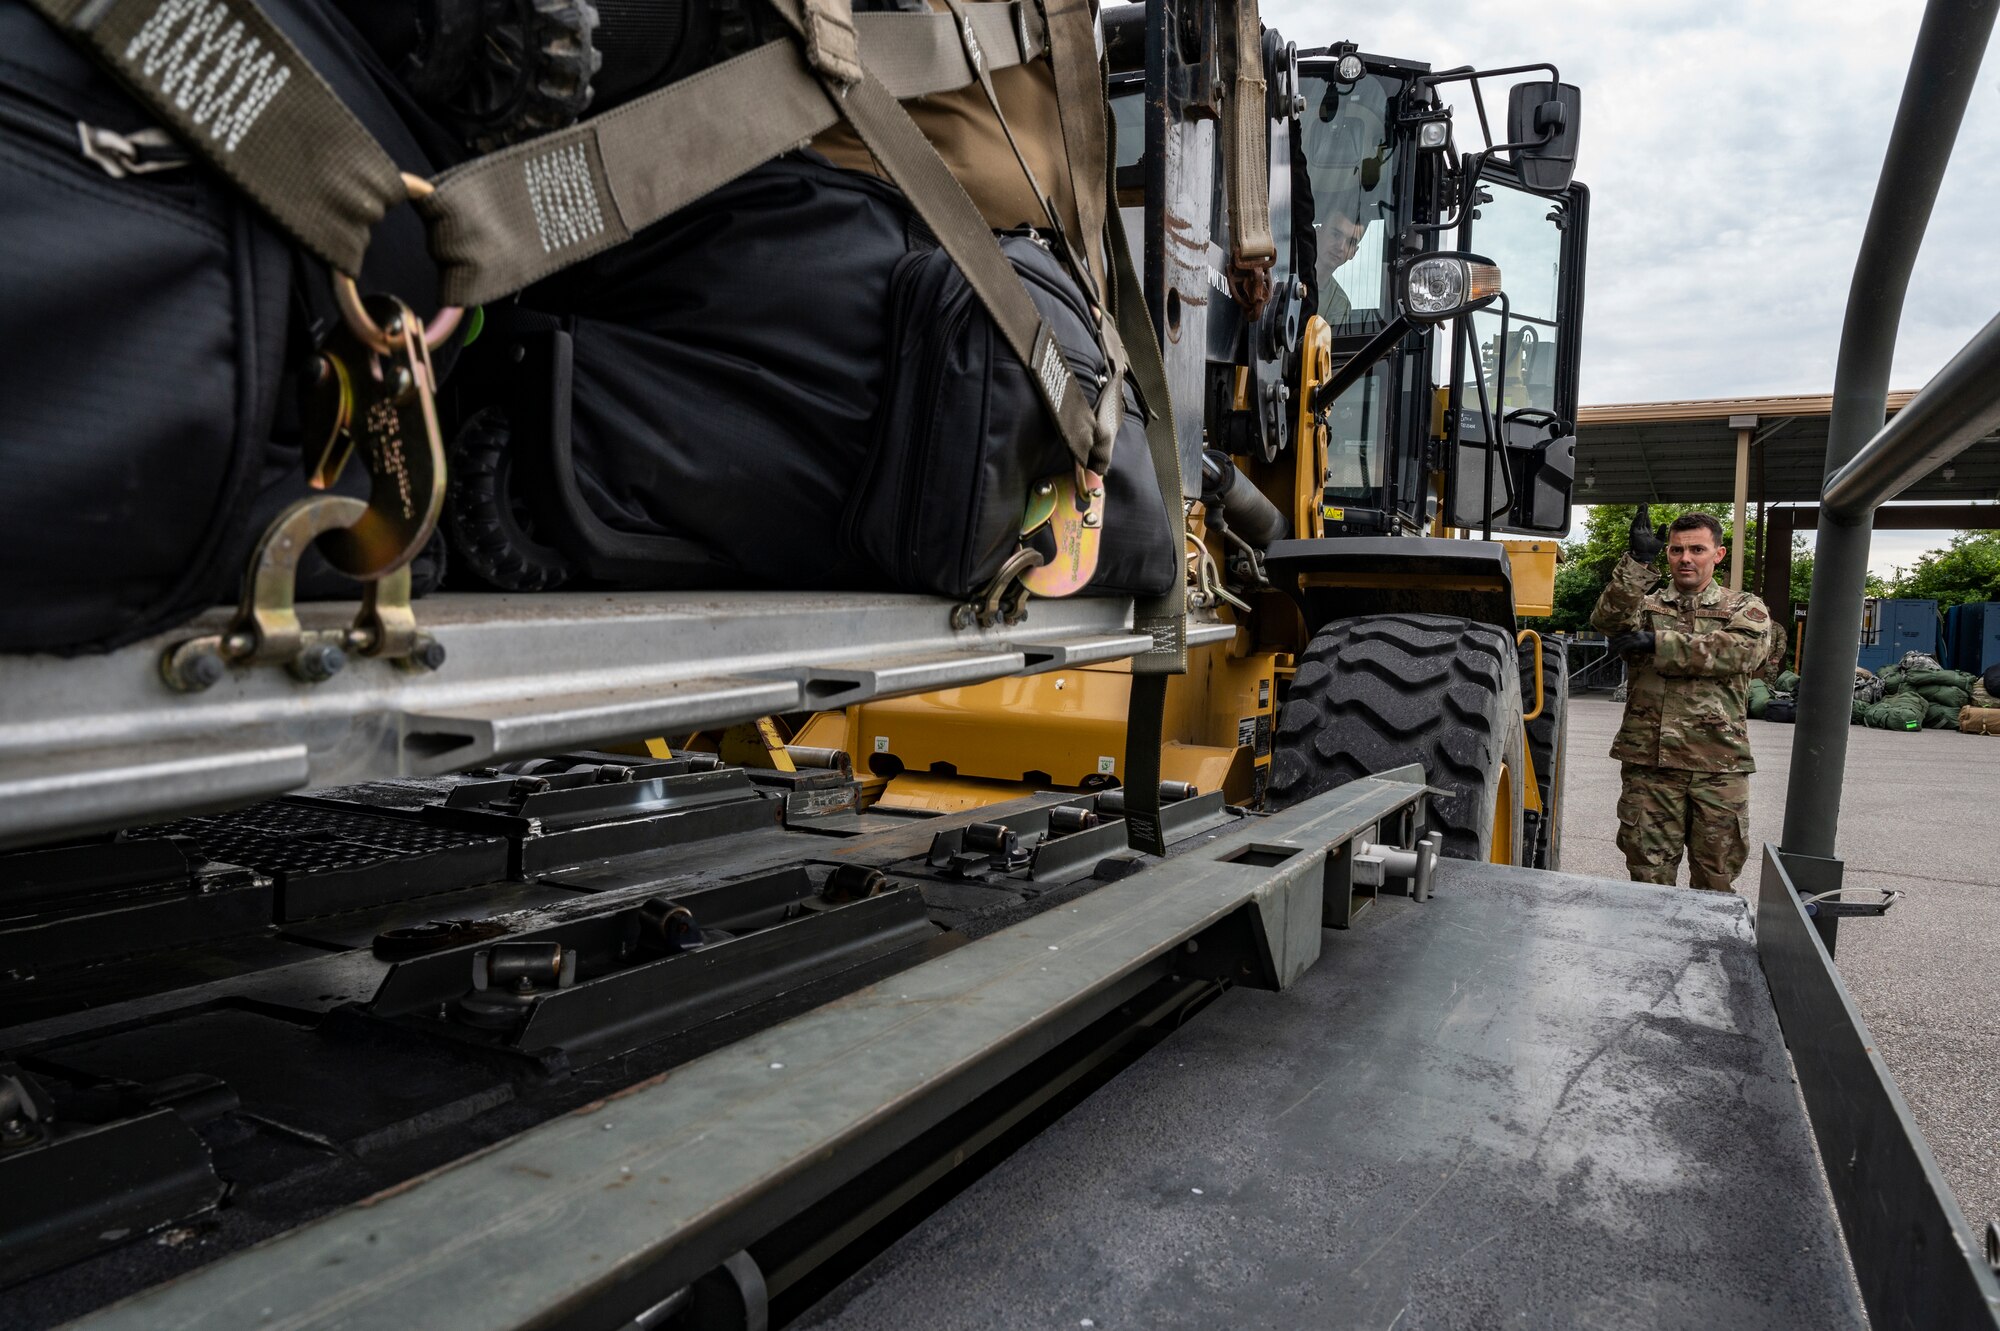 Airmen assigned to the 32nd Aerial Port Squadron load a pallet of cargo onto a 25K Halverson loader at the Pittsburgh International Airport Air Reserve Station, Pennsylvania, May 28, 2021.